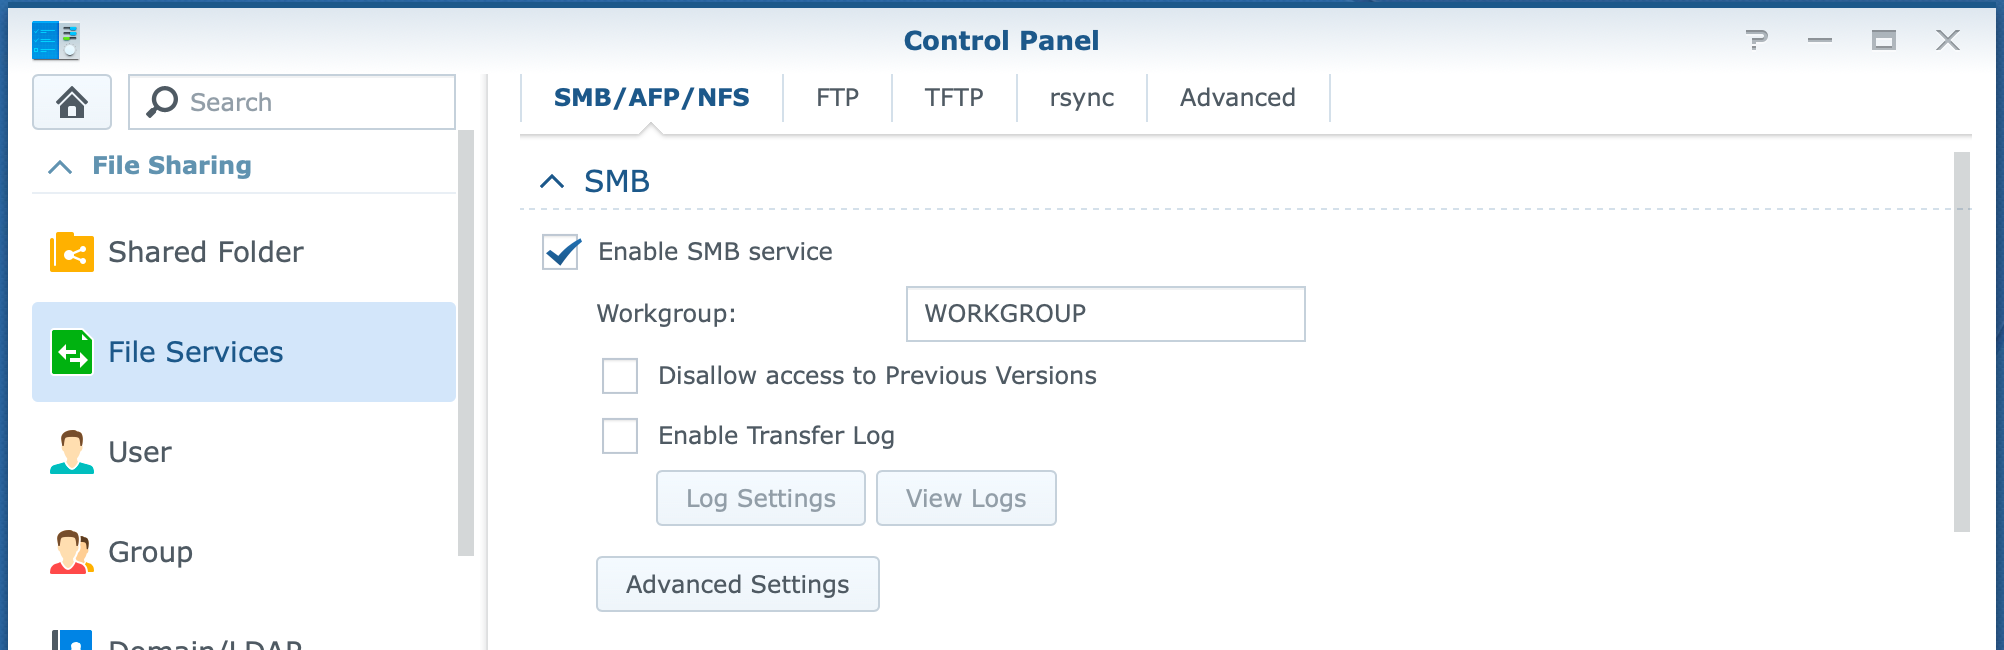 synology, control panel, file services, smb, dsm6